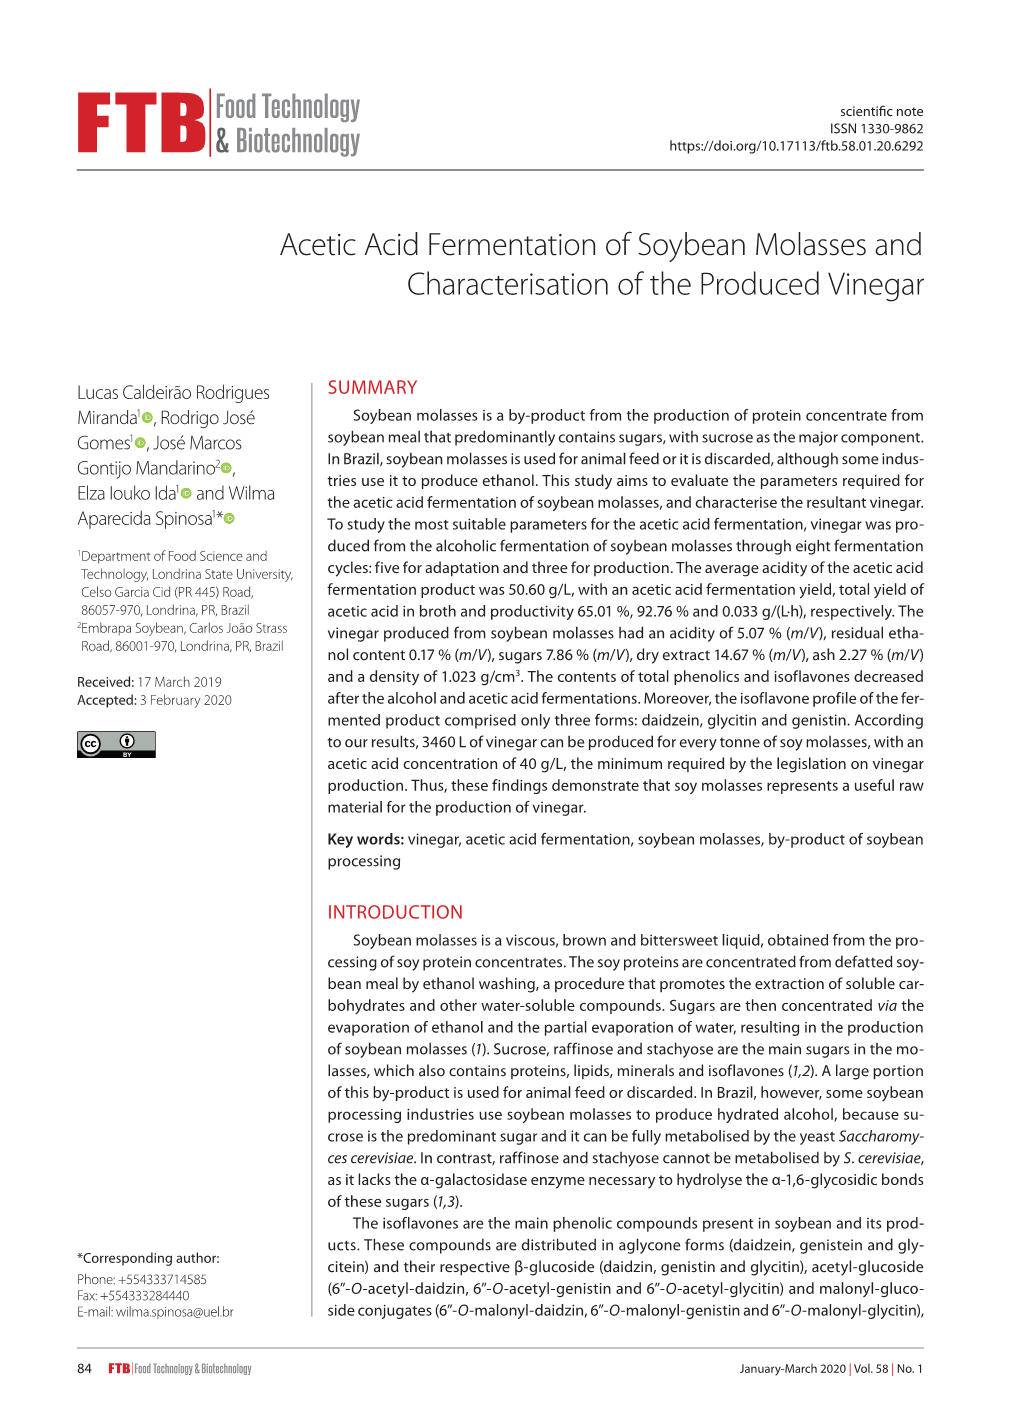 Acetic Acid Fermentation of Soybean Molasses and Characterisation of the Produced Vinegar